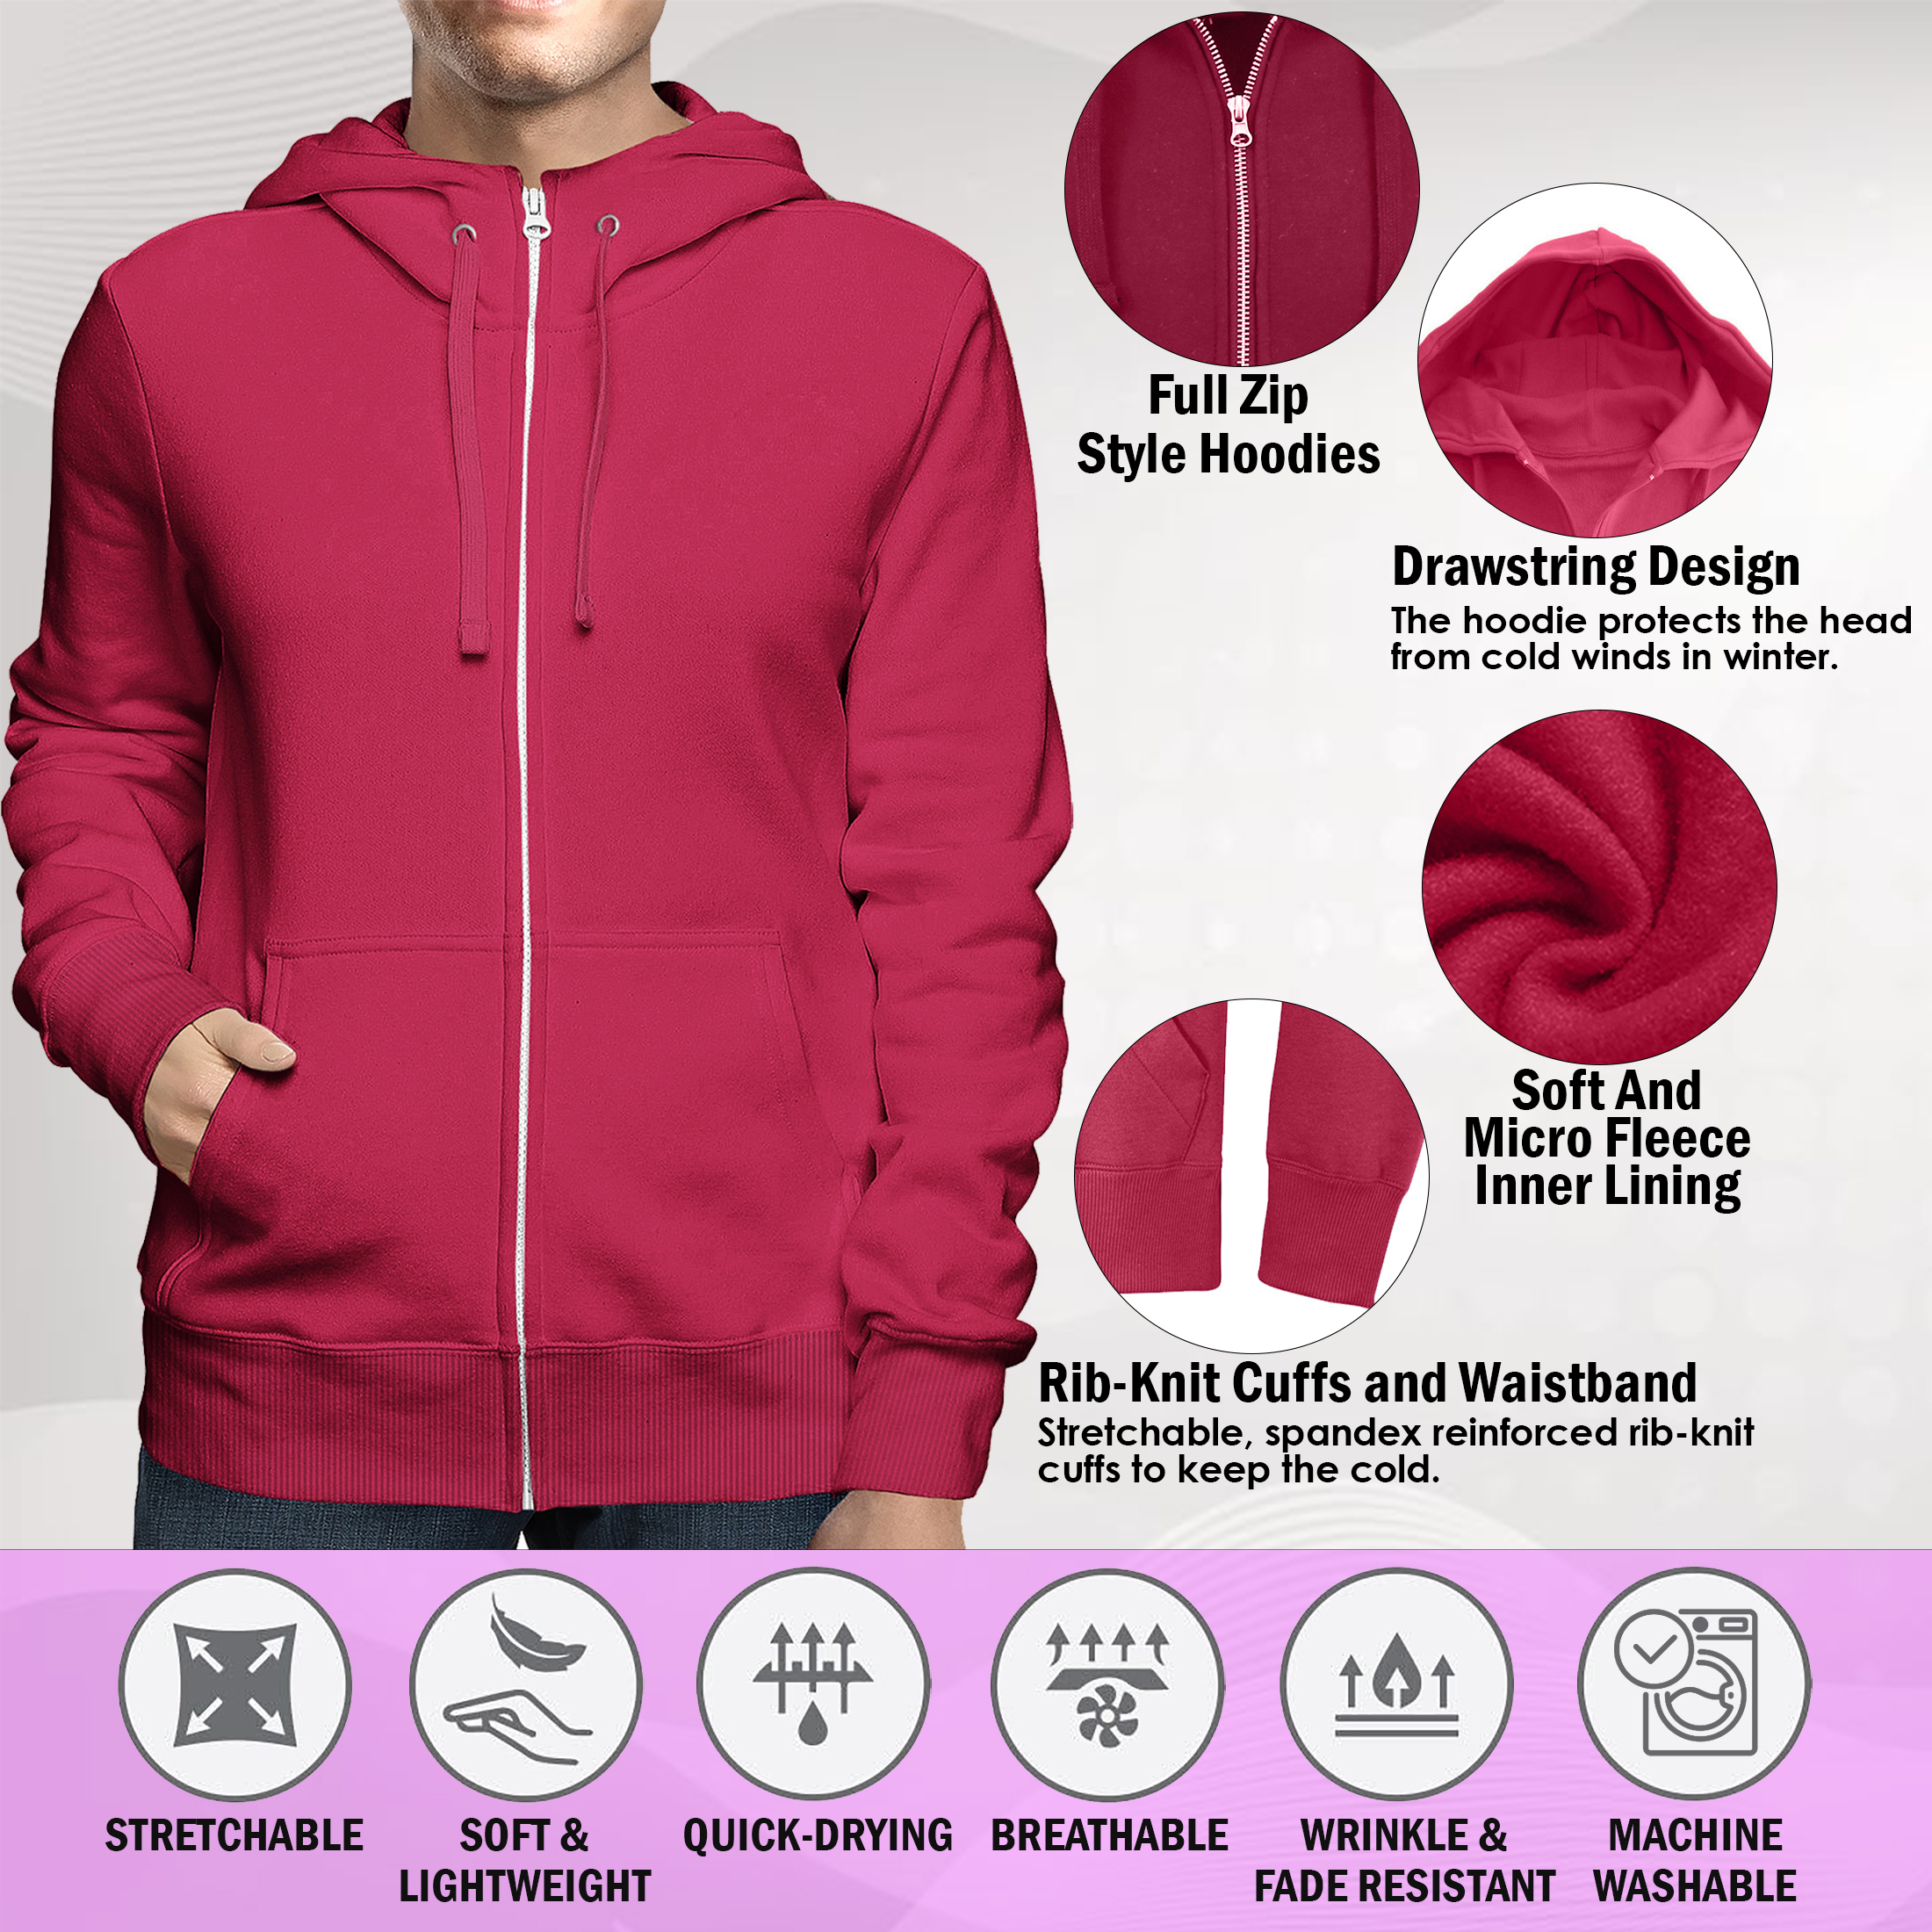 2-Pack: Men's Full Zip Up Fleece-Lined Hoodie Sweatshirt (Big & Tall Size Available) - Burgundy, 2x-large